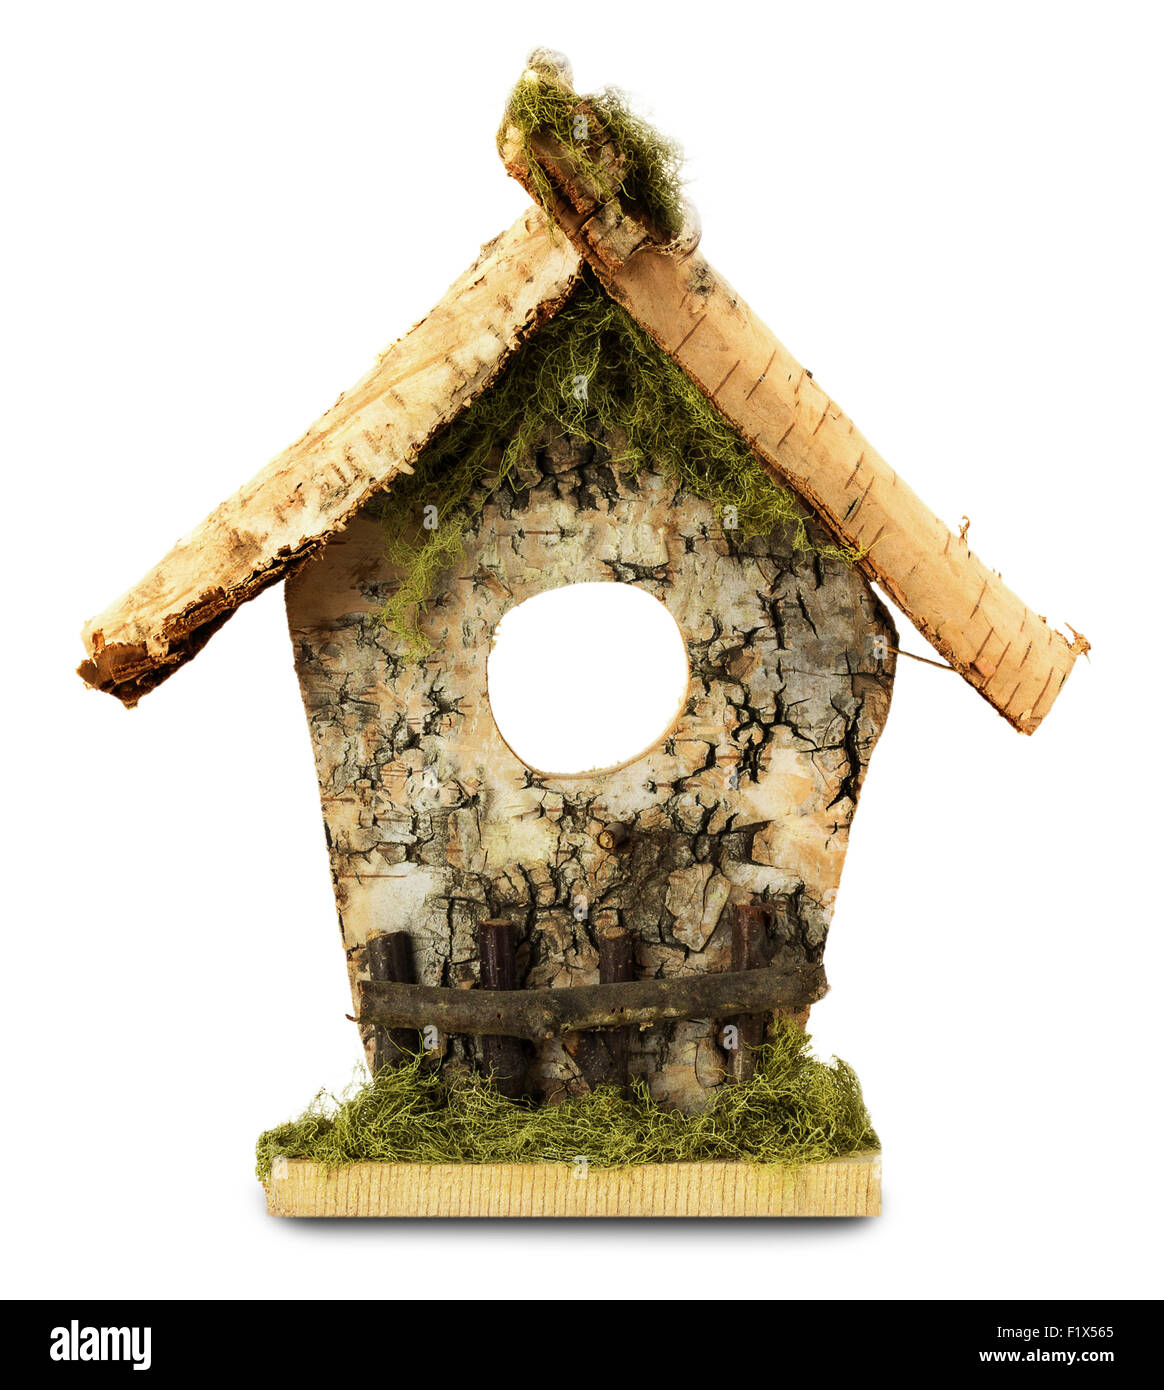 wooden birdhouse isolated on the white background. Stock Photo